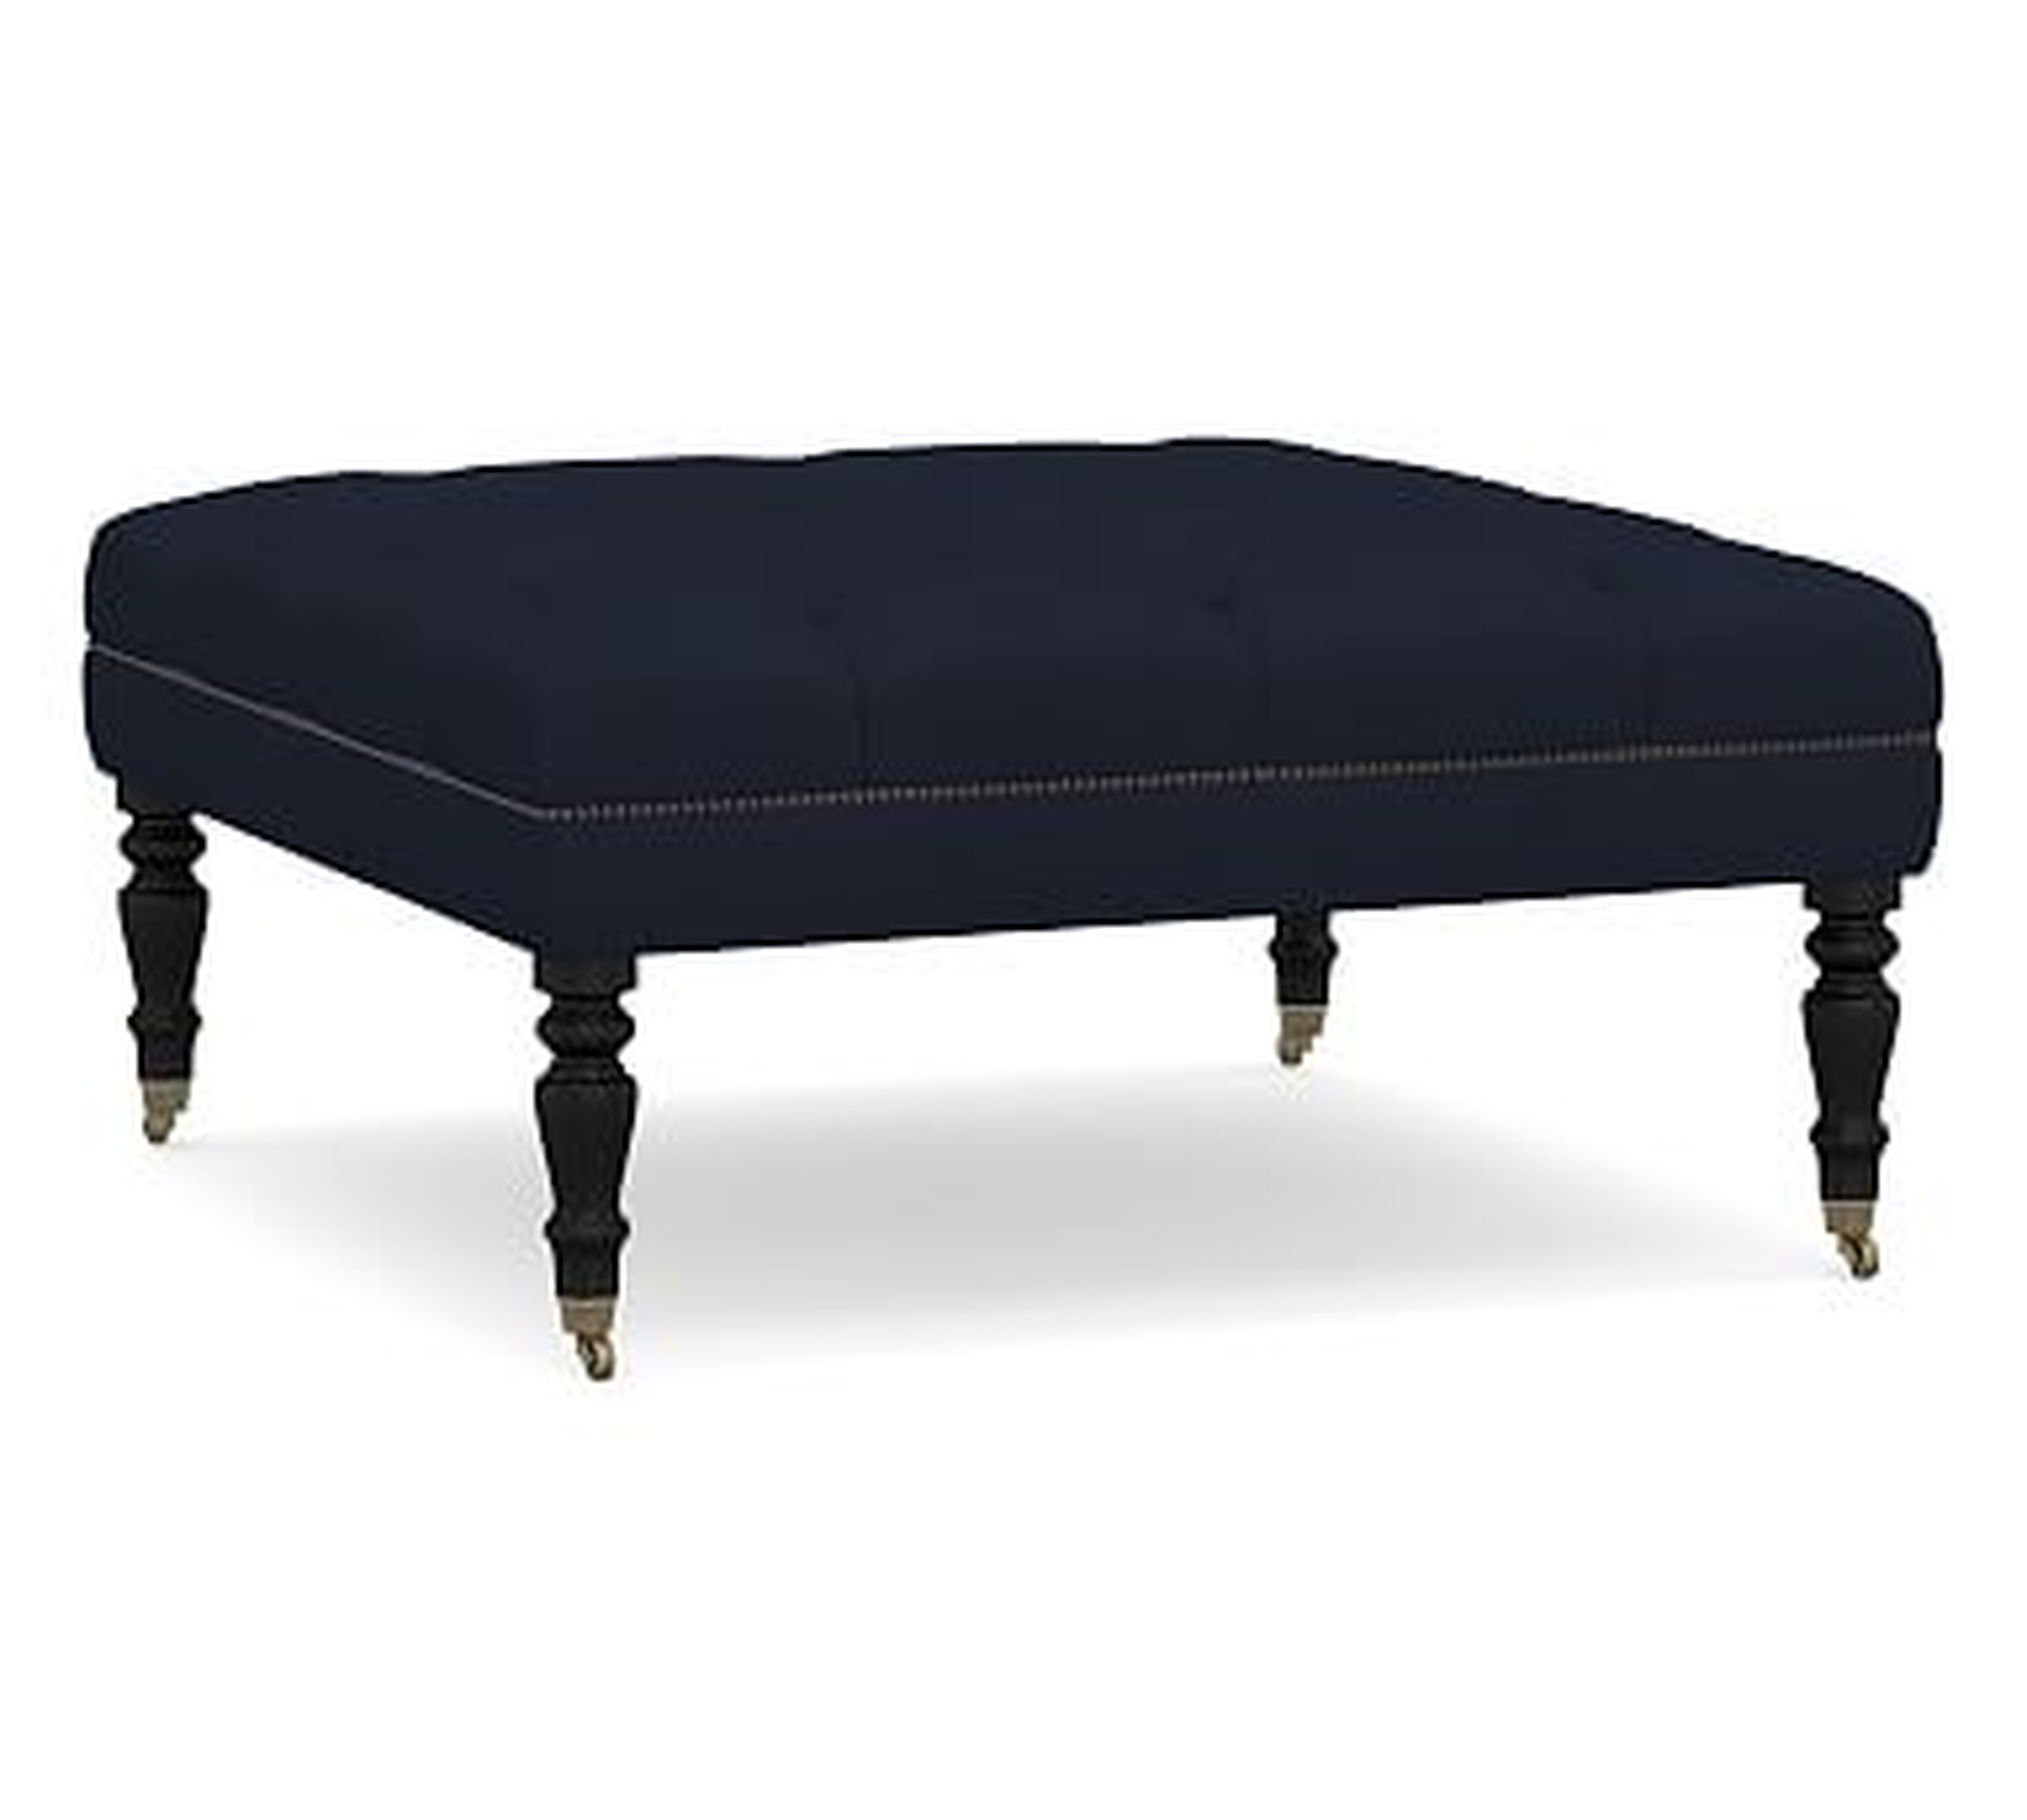 Raleigh Upholstered Tufted Square Ottoman with Turned Black Legs &amp; Bronze Nailheads, Performance Twill Cadet Navy - Pottery Barn